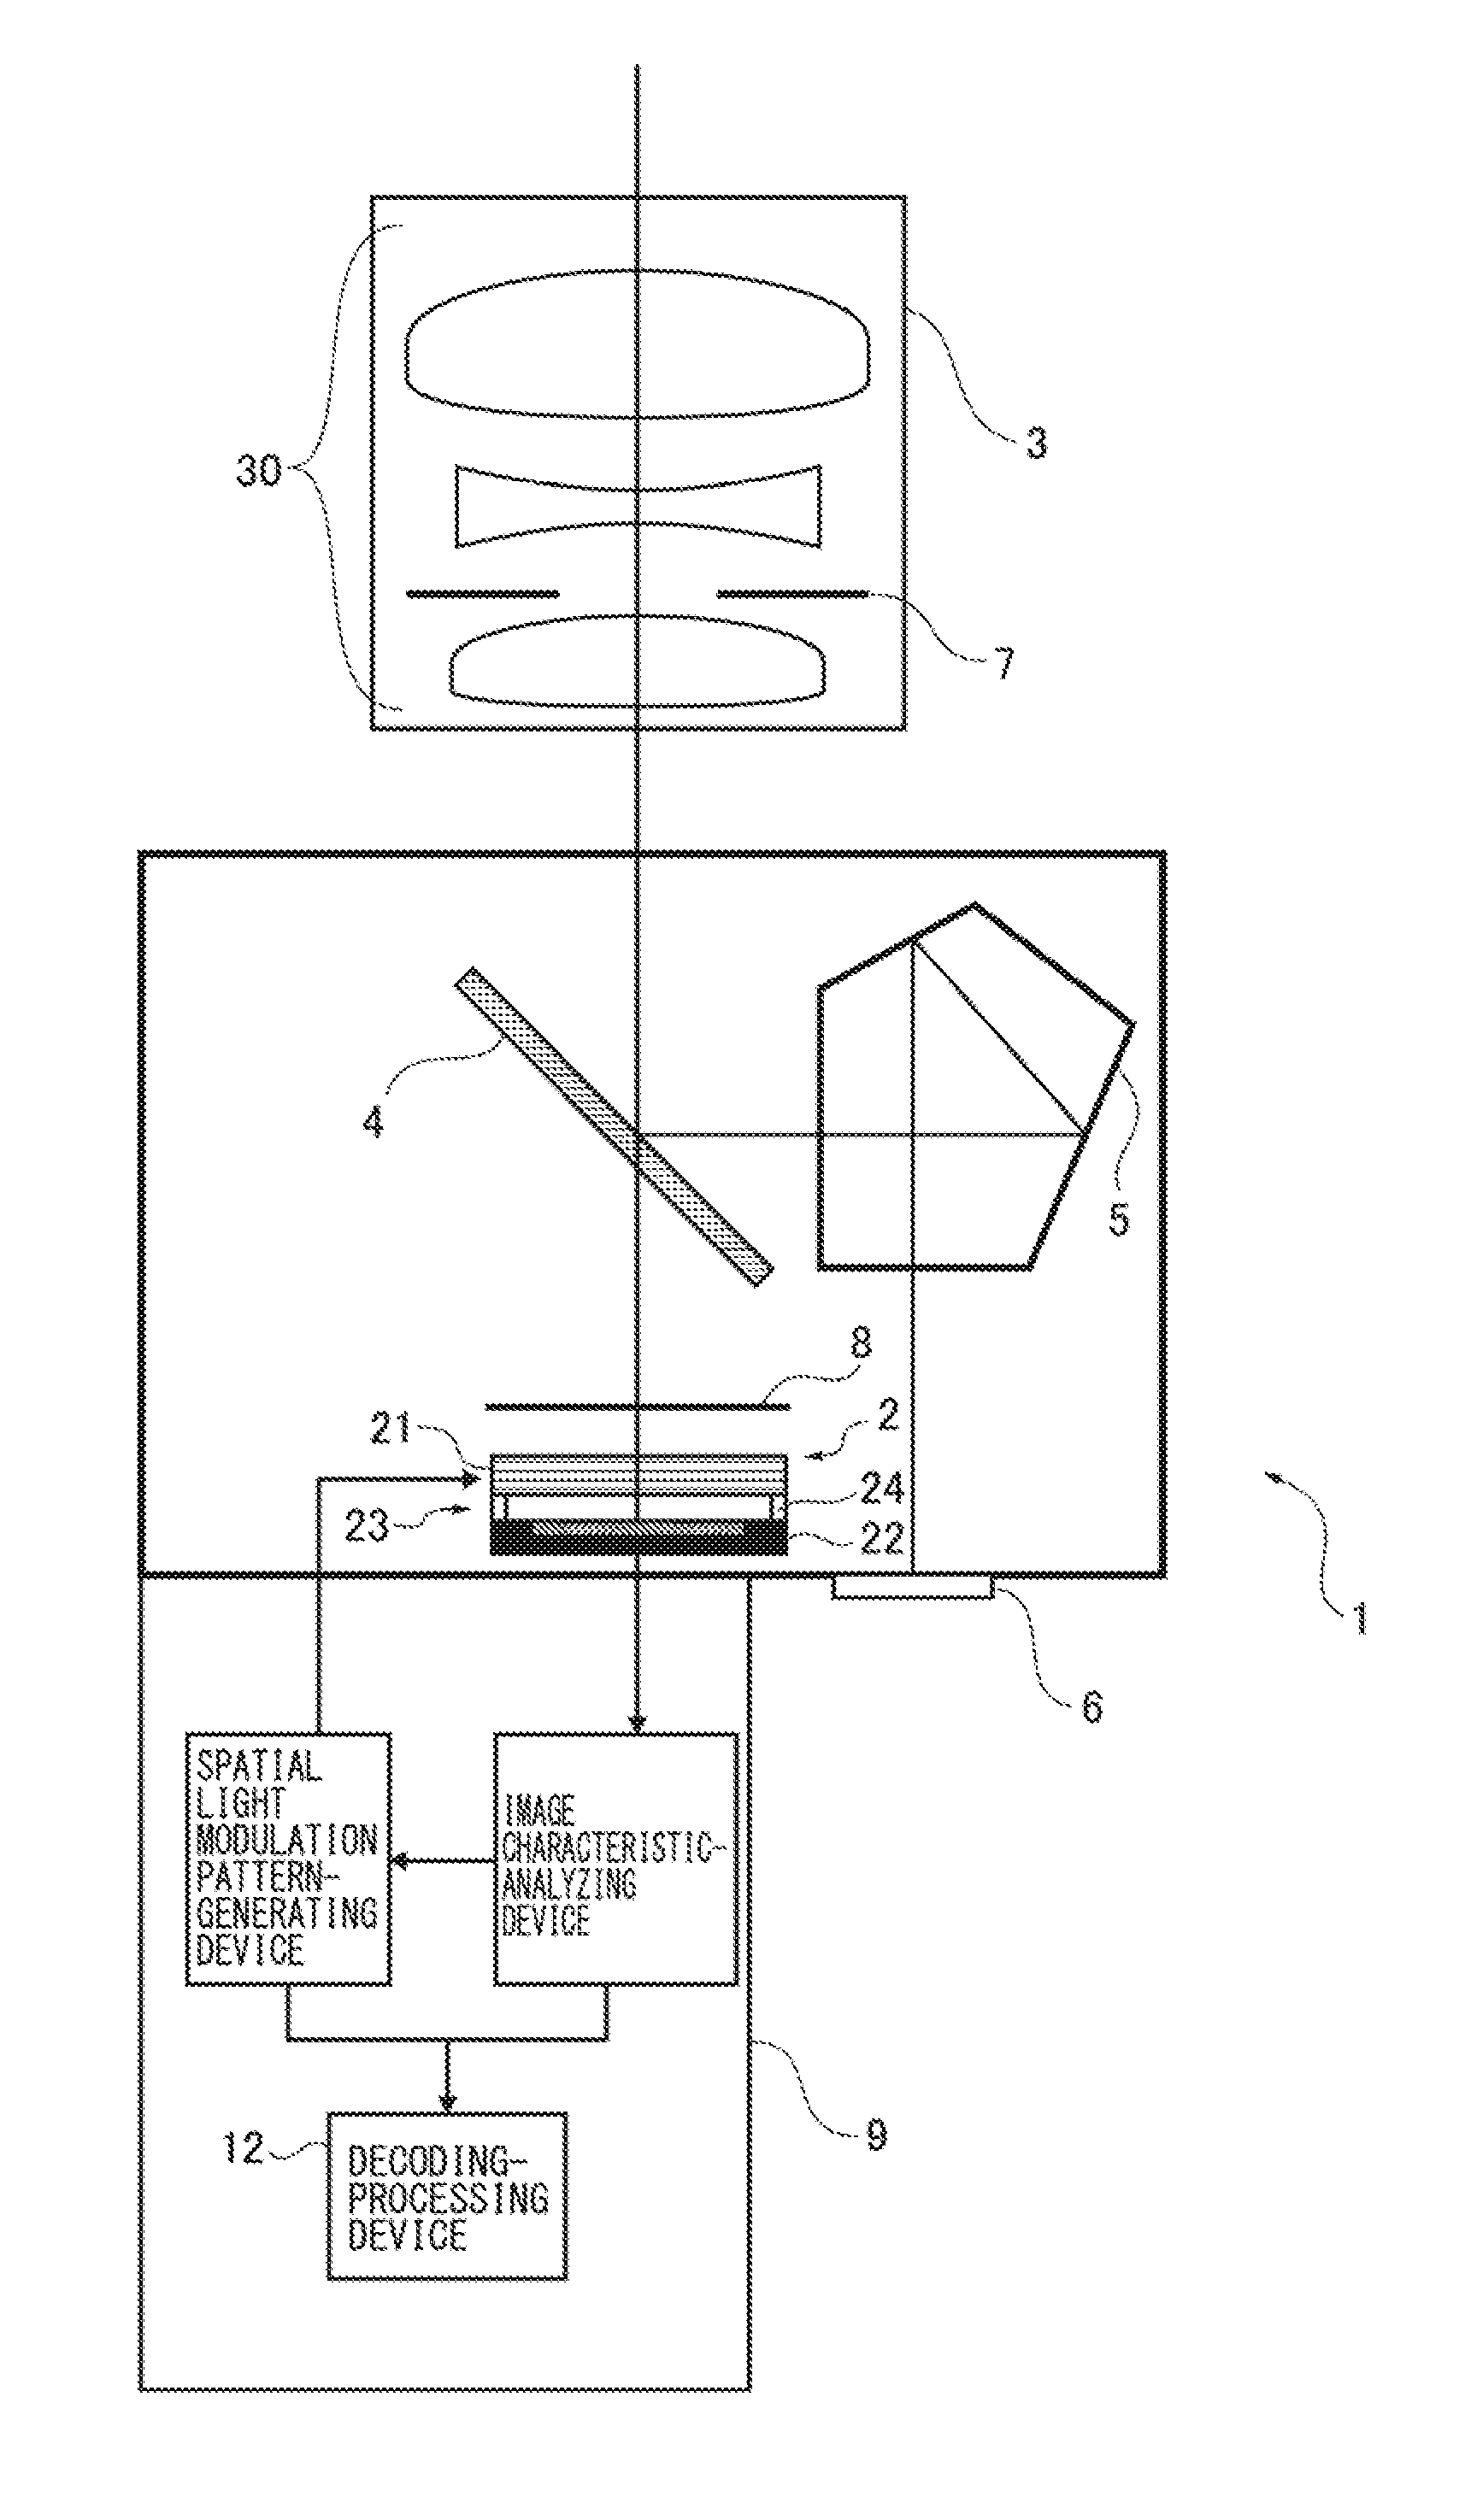 Imaging module and imaging device